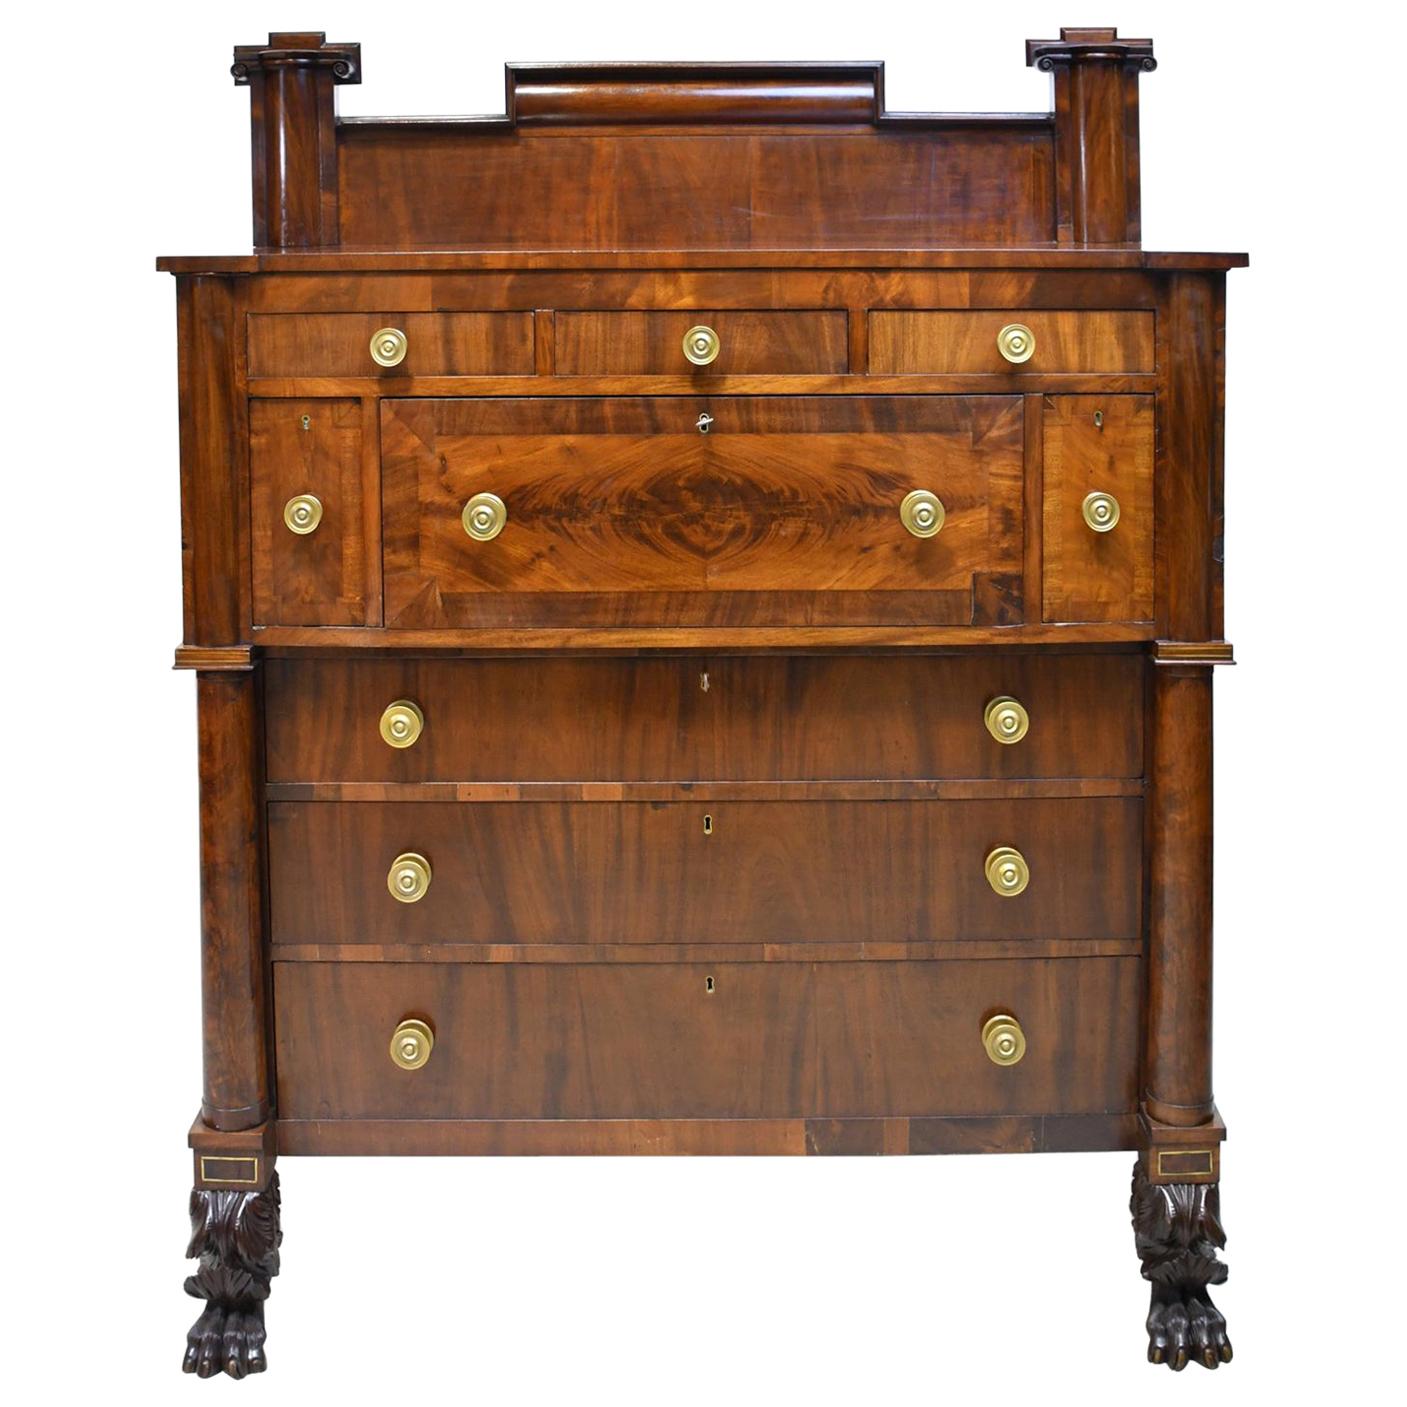 Rhode Island Empire Butler's Chest of Drawers with Desk in Mahogany, circa 1825